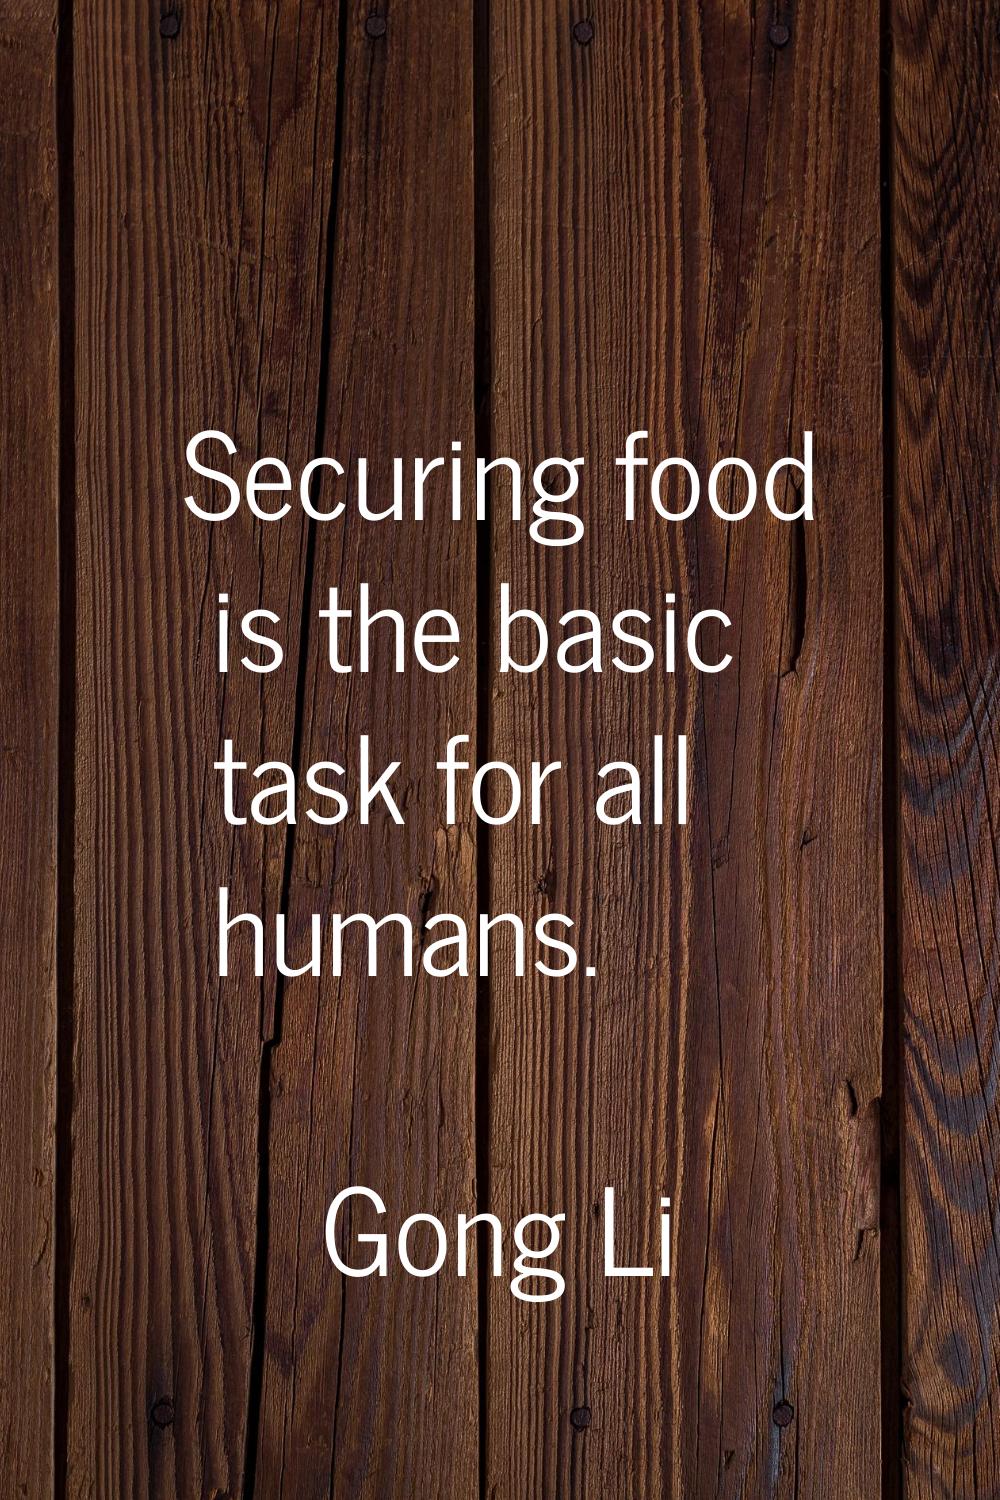 Securing food is the basic task for all humans.